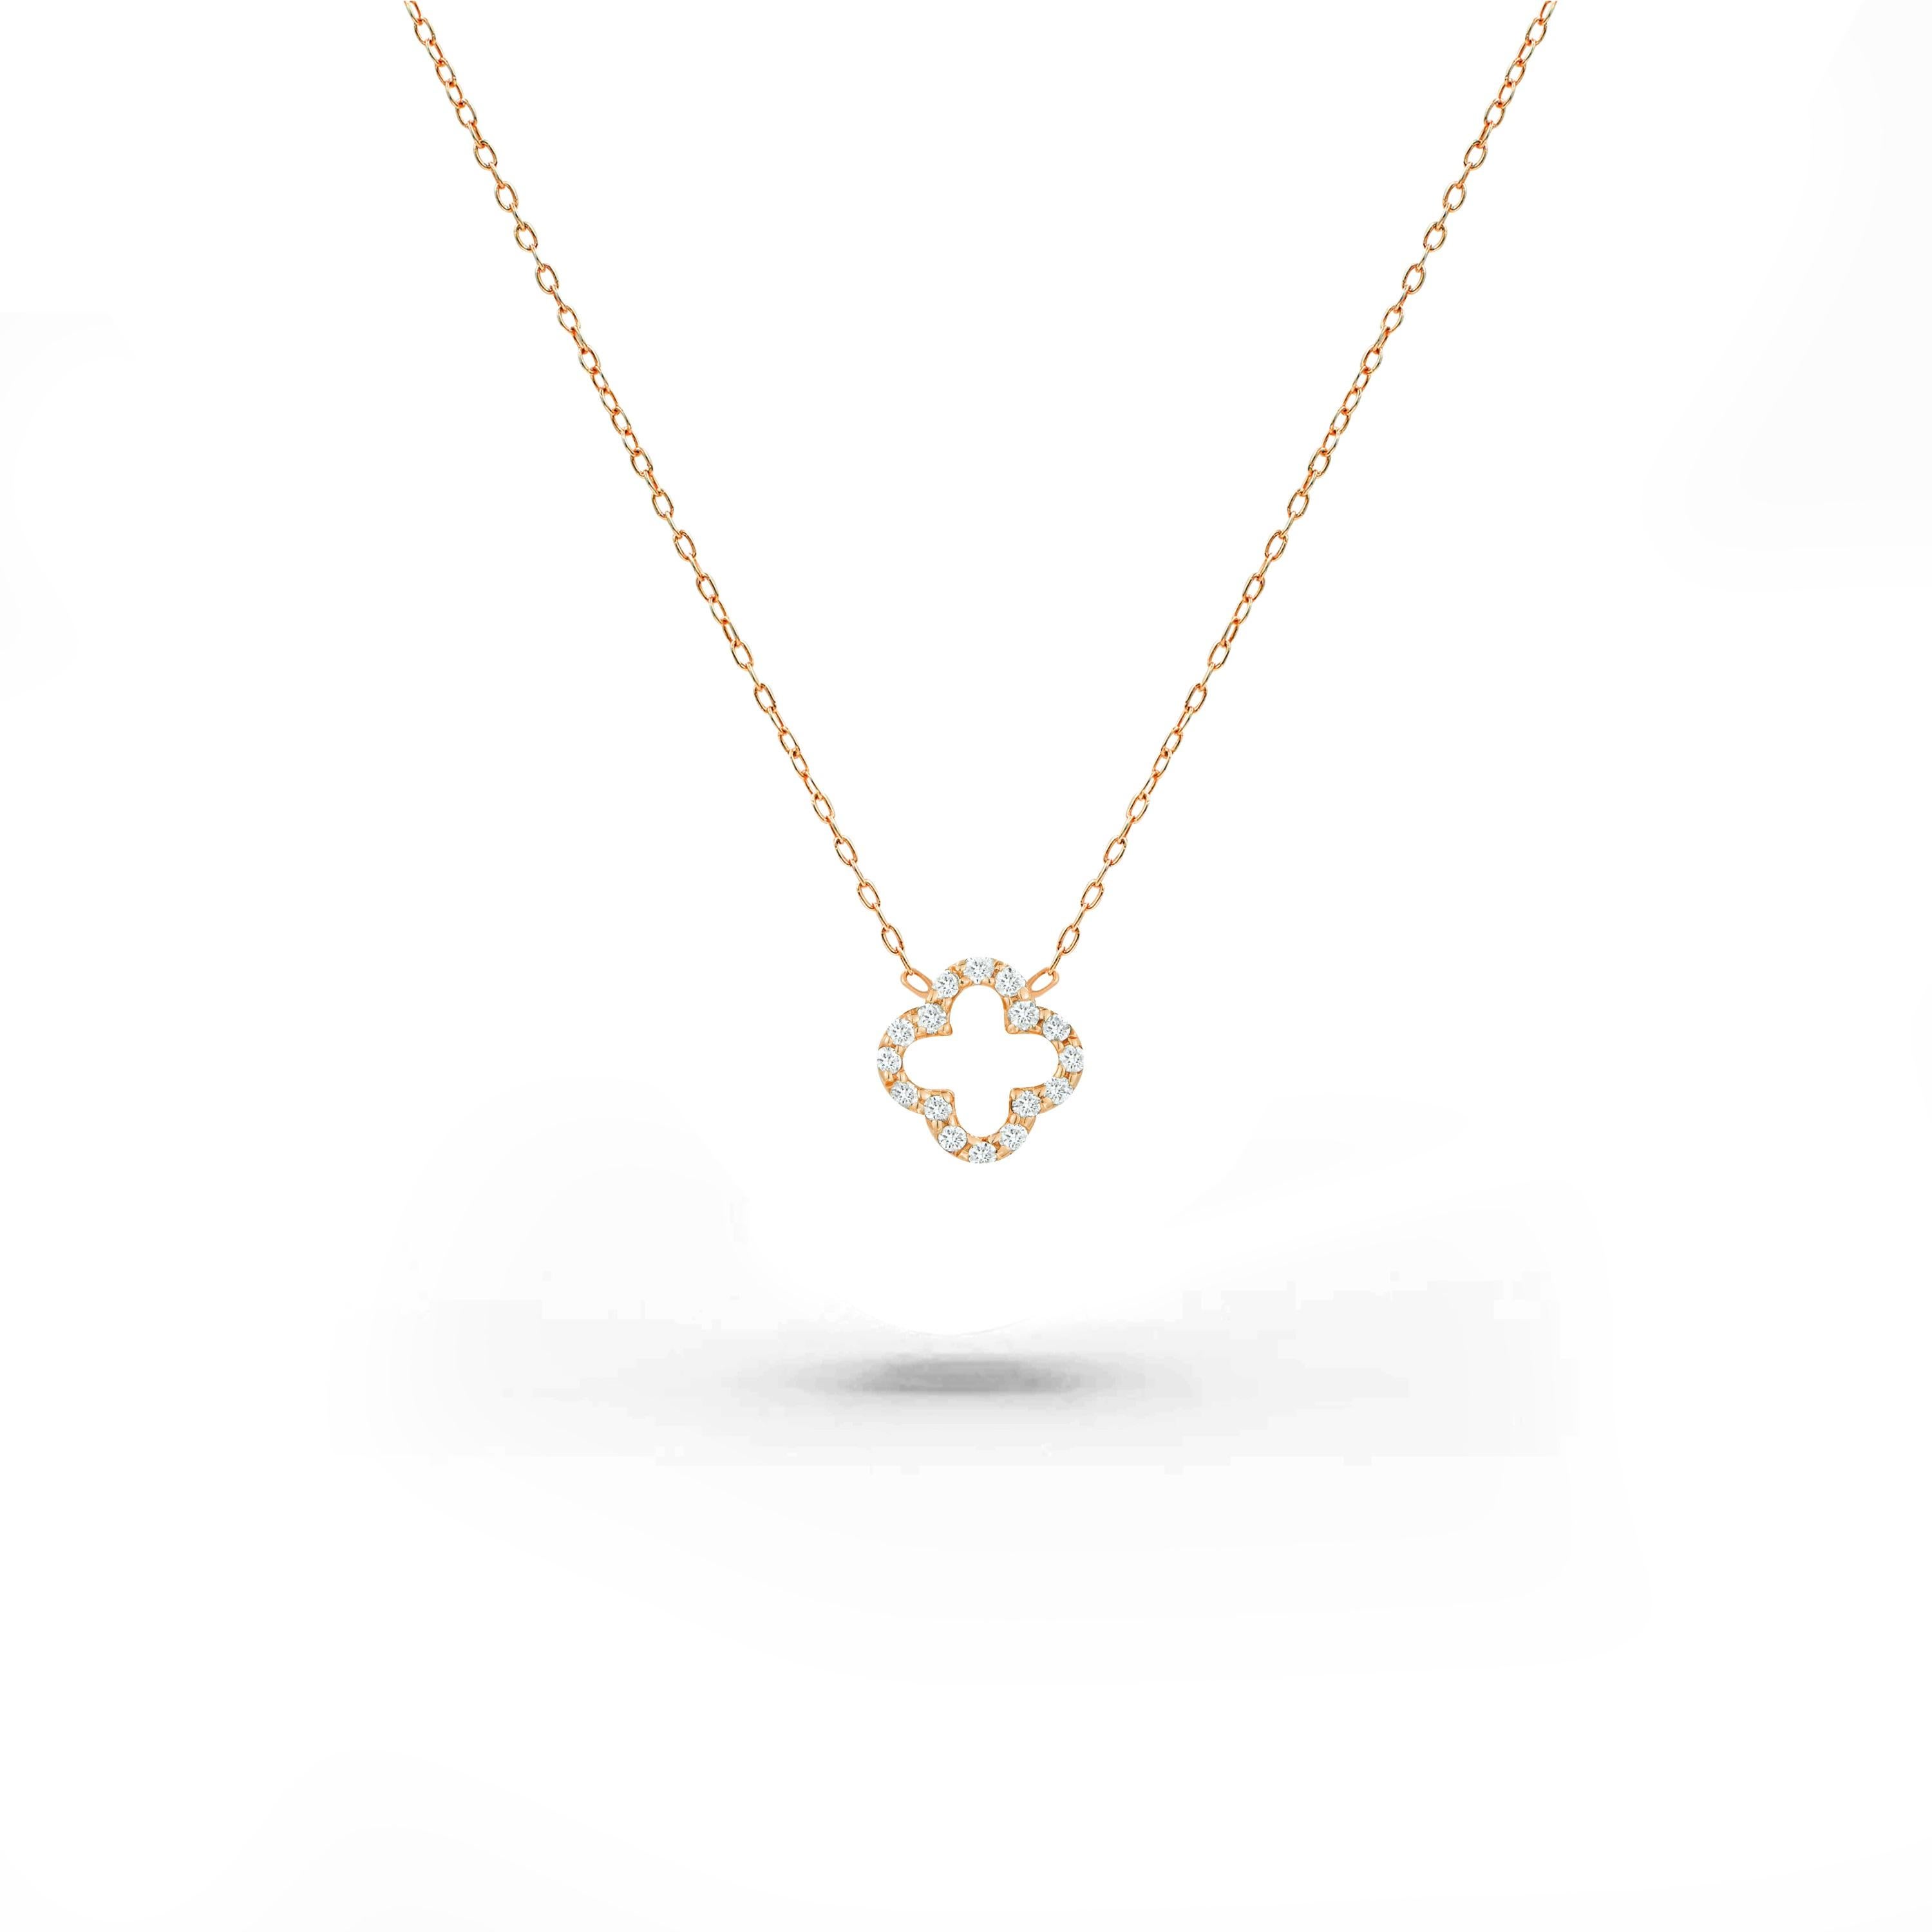 Delicate Minimal Necklace made of 18k solid gold available in three colors, Rose Gold / White Gold / Yellow Gold.

Natural genuine round cut diamond each diamond is hand selected by me to ensure quality and set by a master setter in our studio.